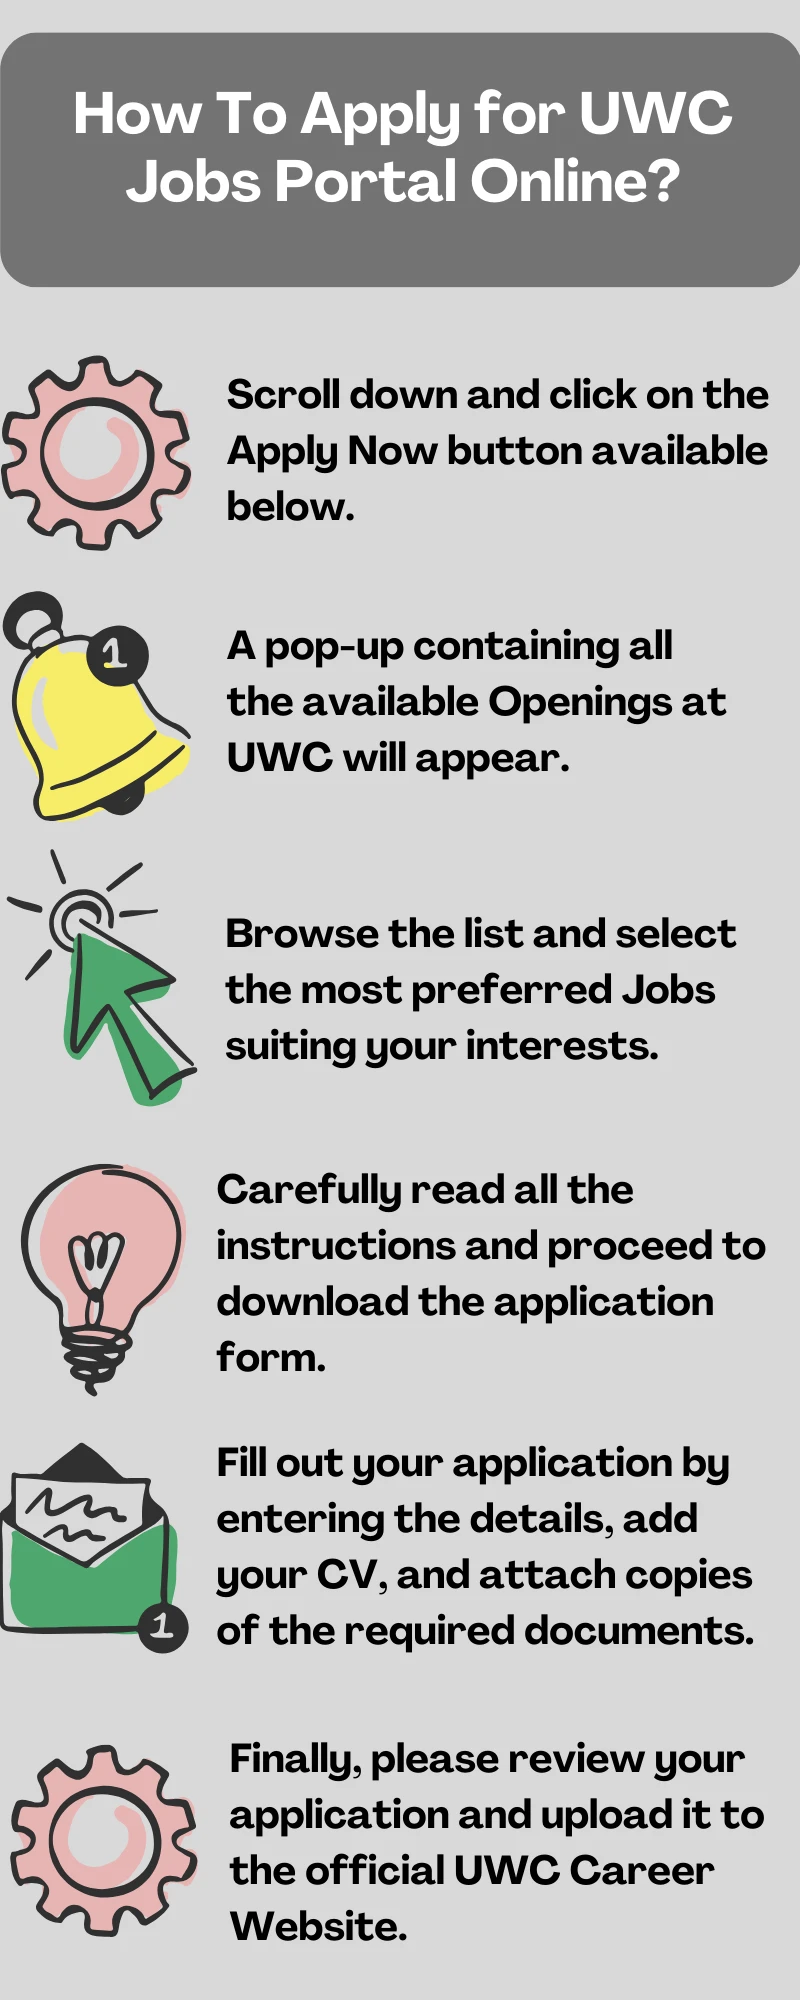 How To Apply for UWC Jobs Portal Online?